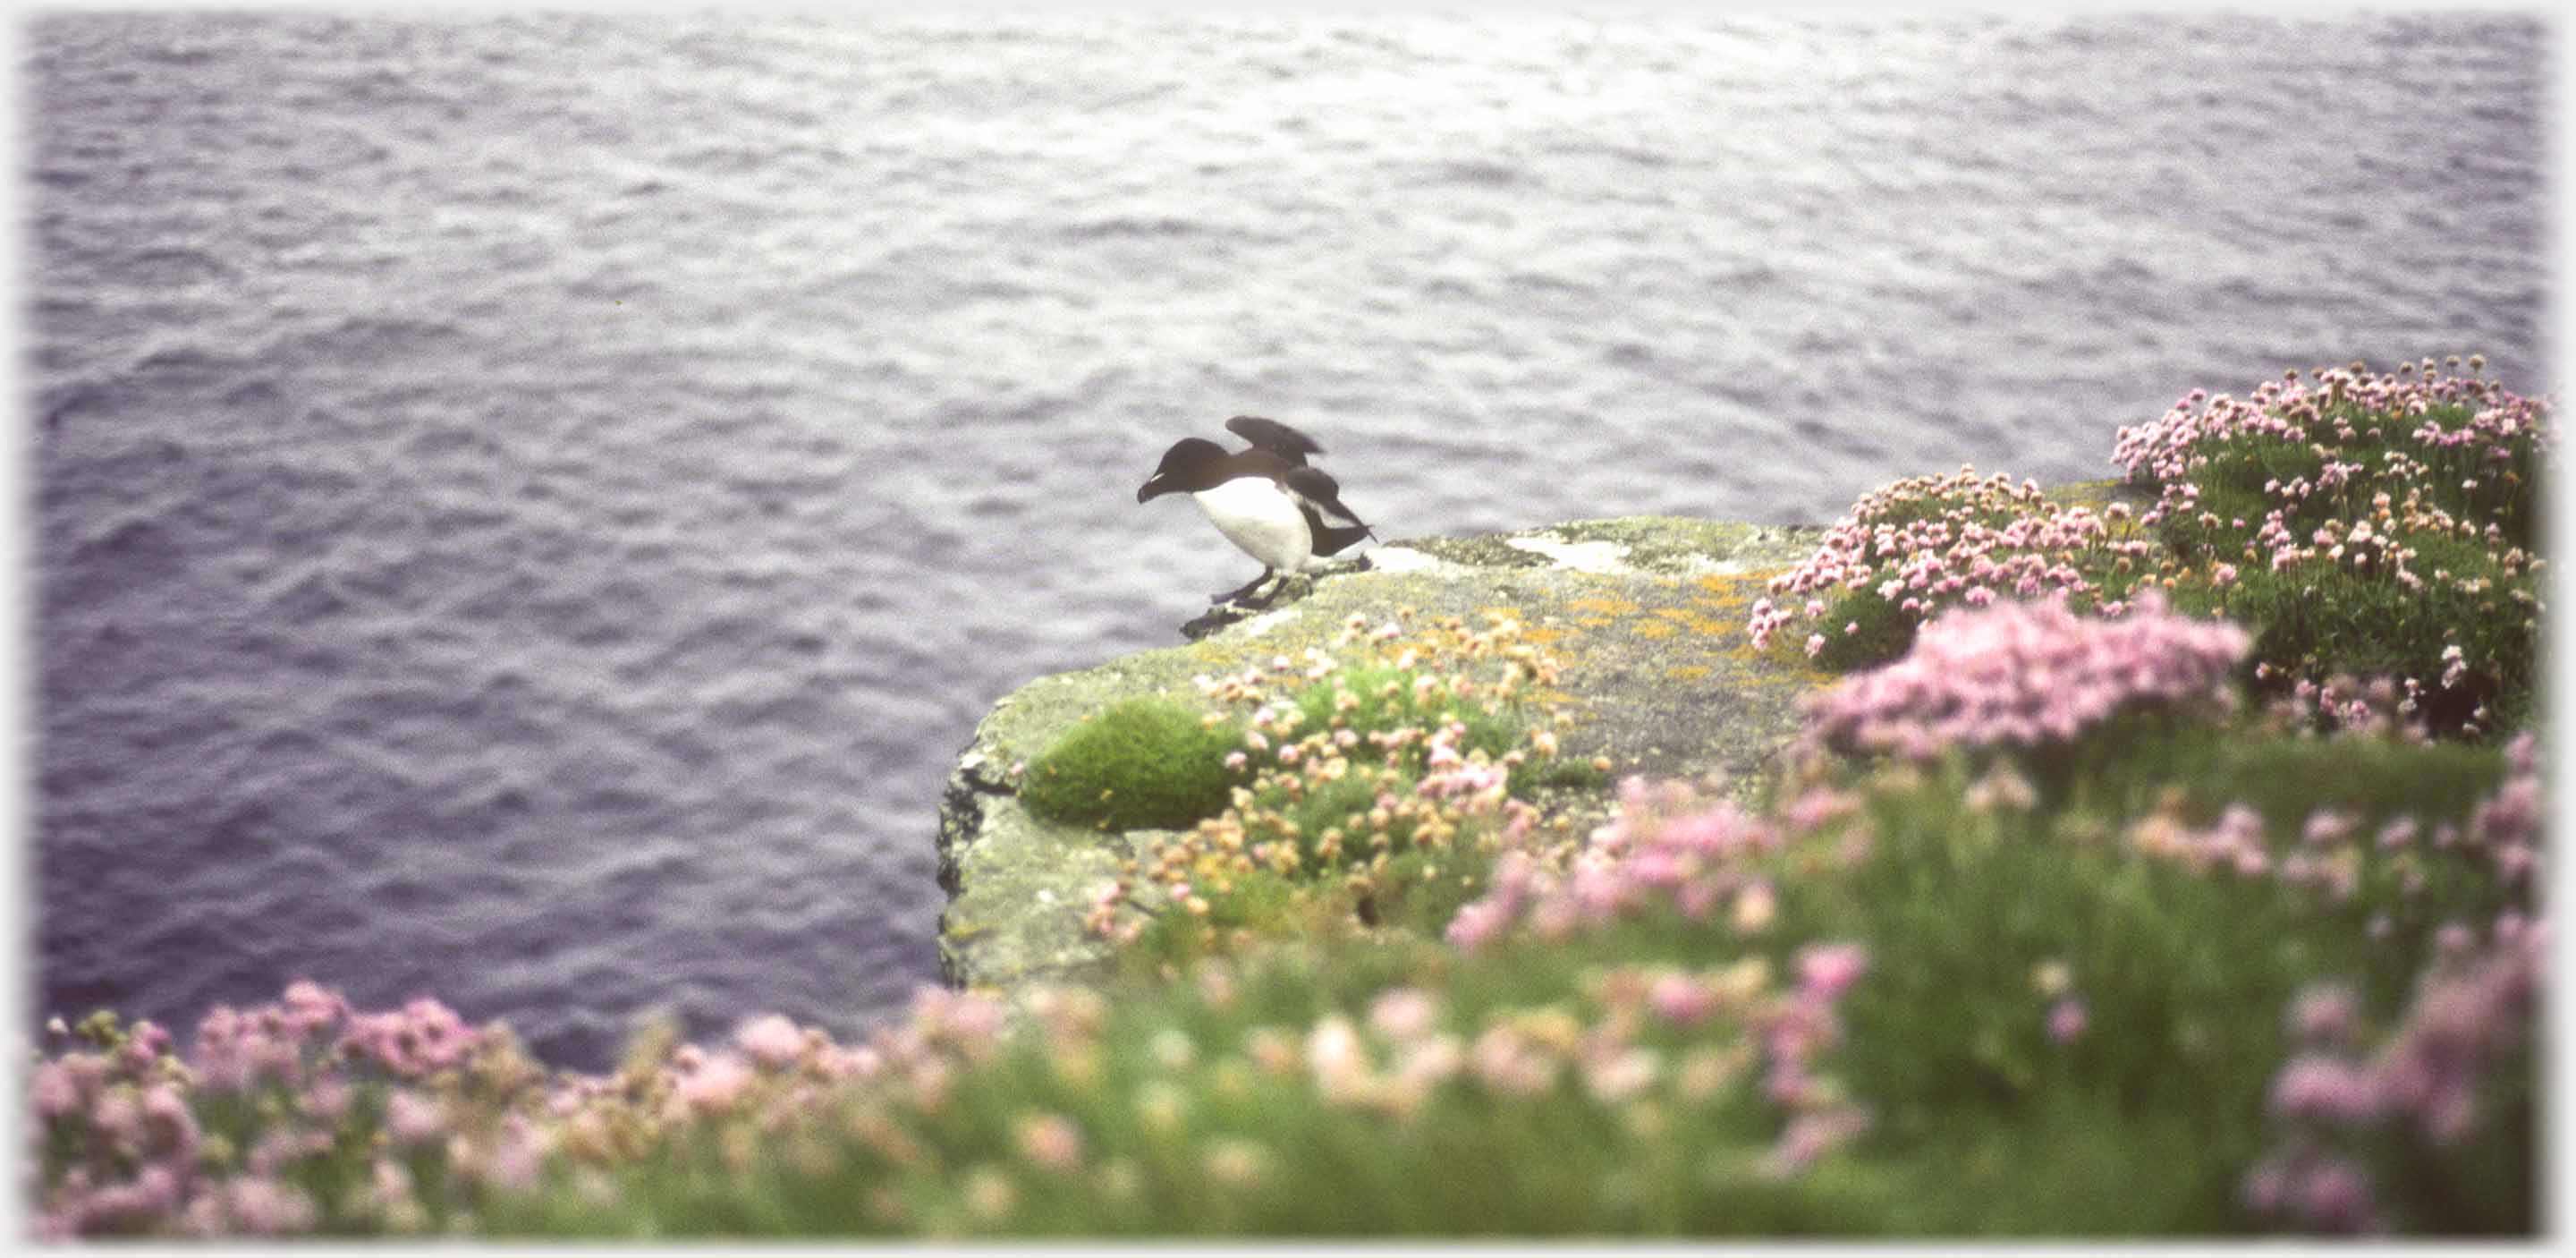 Banks of thrift on cliff with razorbill at edge.